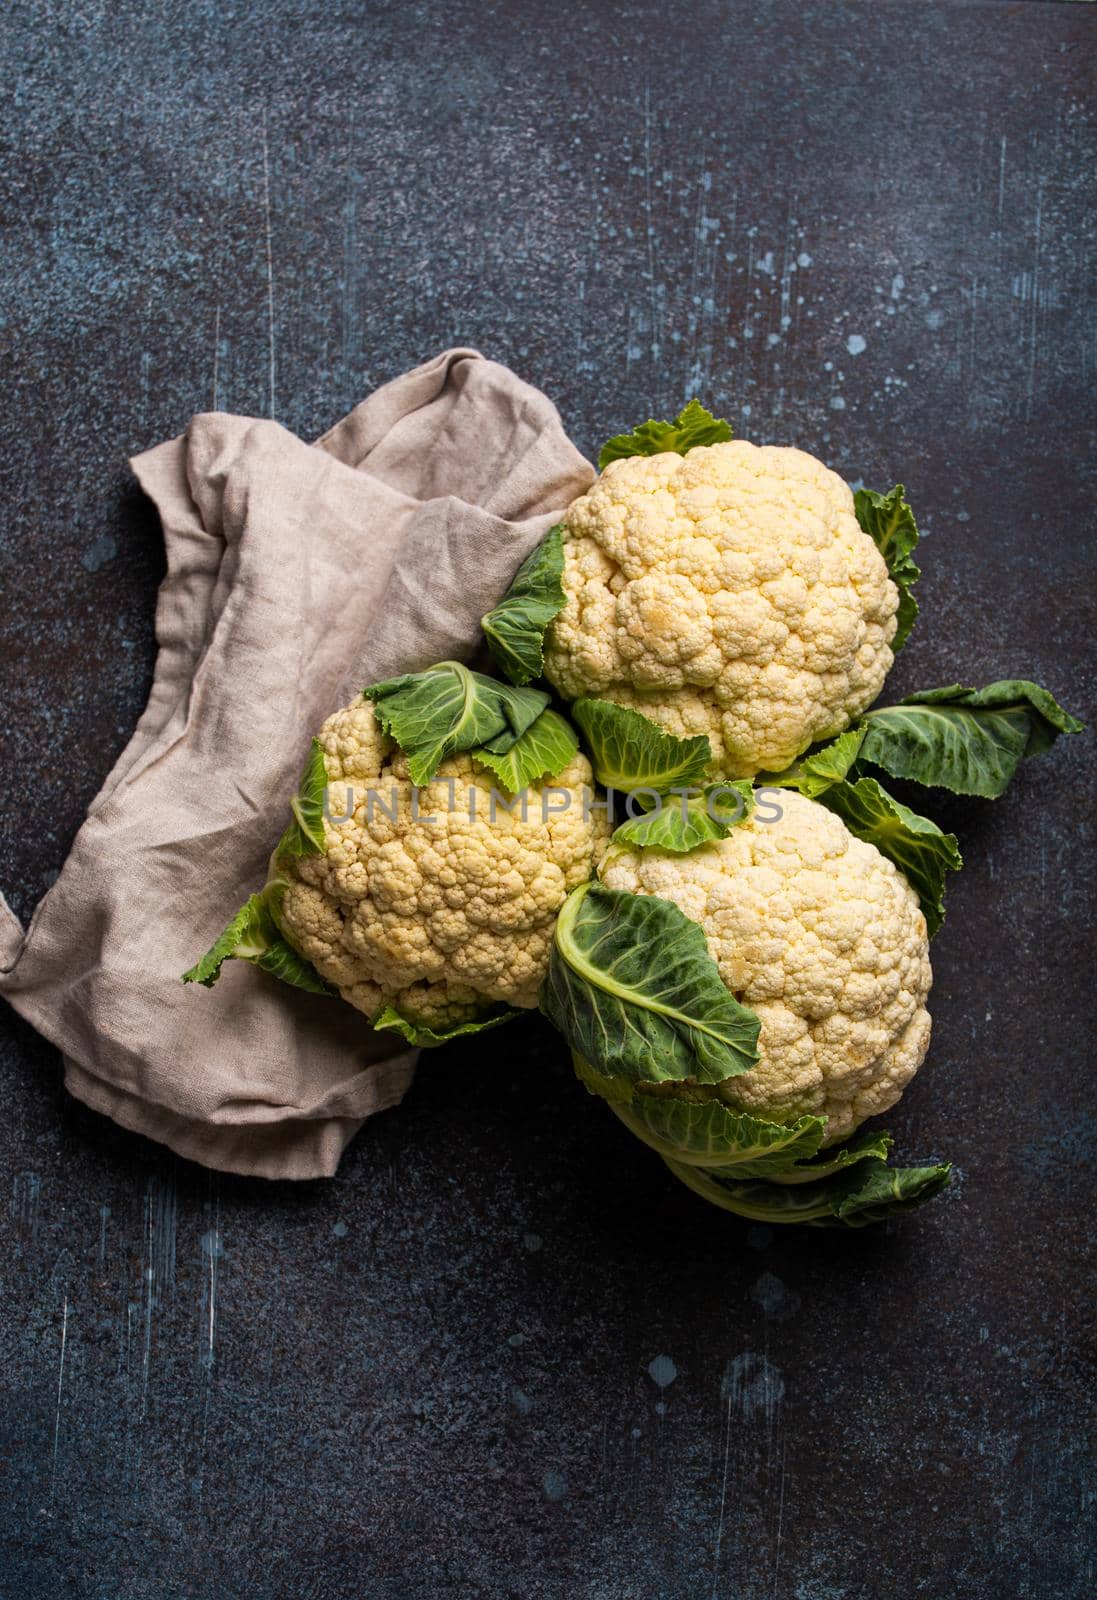 Fresh whole raw organic white cauliflower on dark stone vintage background table, ready to be cooked, top view. Vegetarian food, clean eating concept .